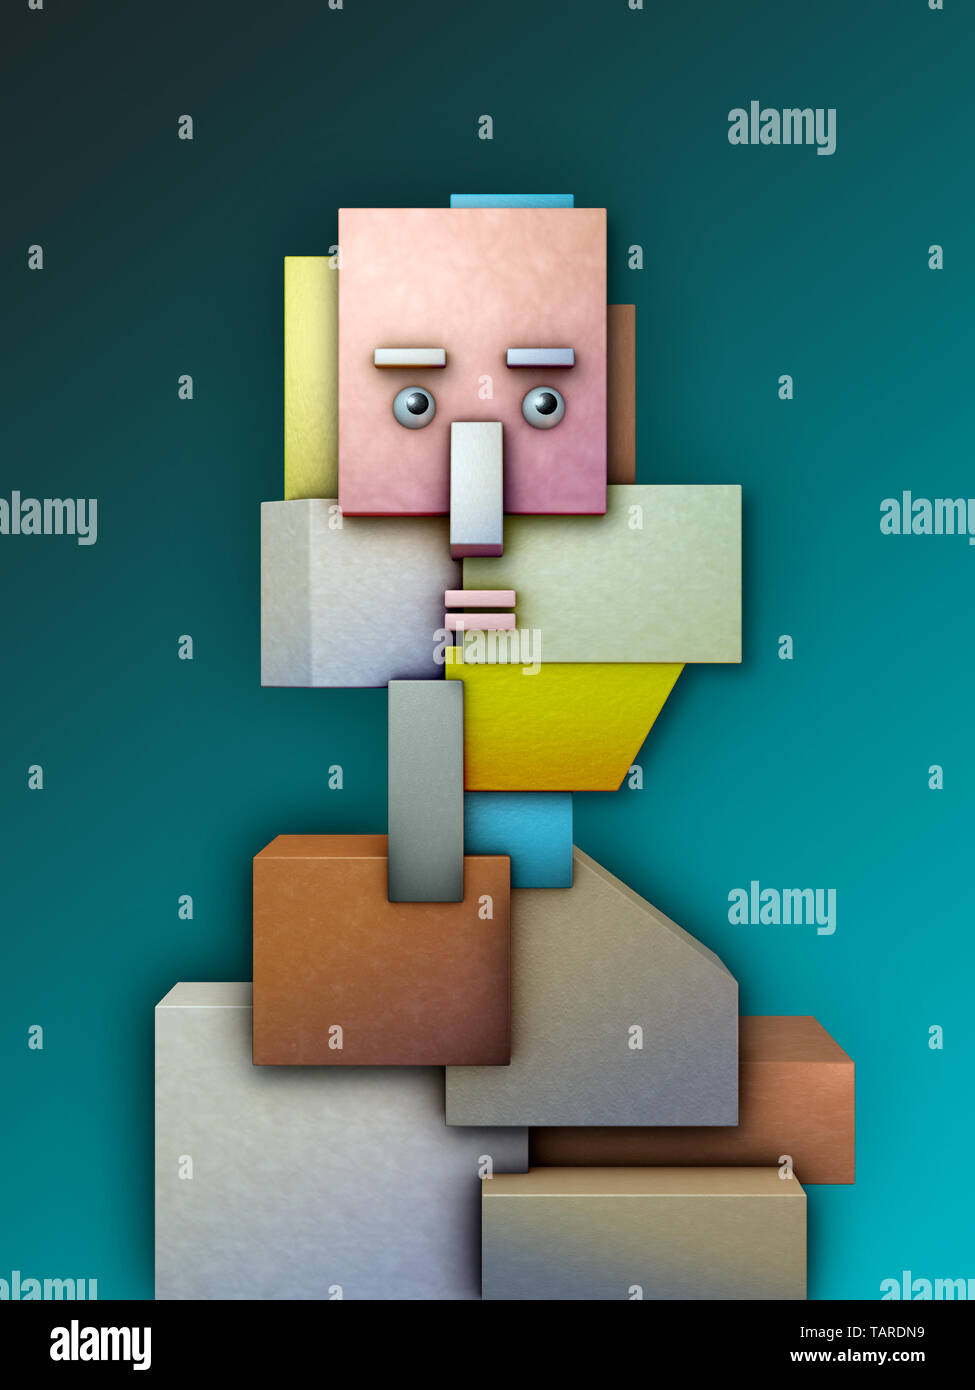 Human head made up by geometrical shapes. Conceptual image about personal identity. 3D illustration. Stock Photo